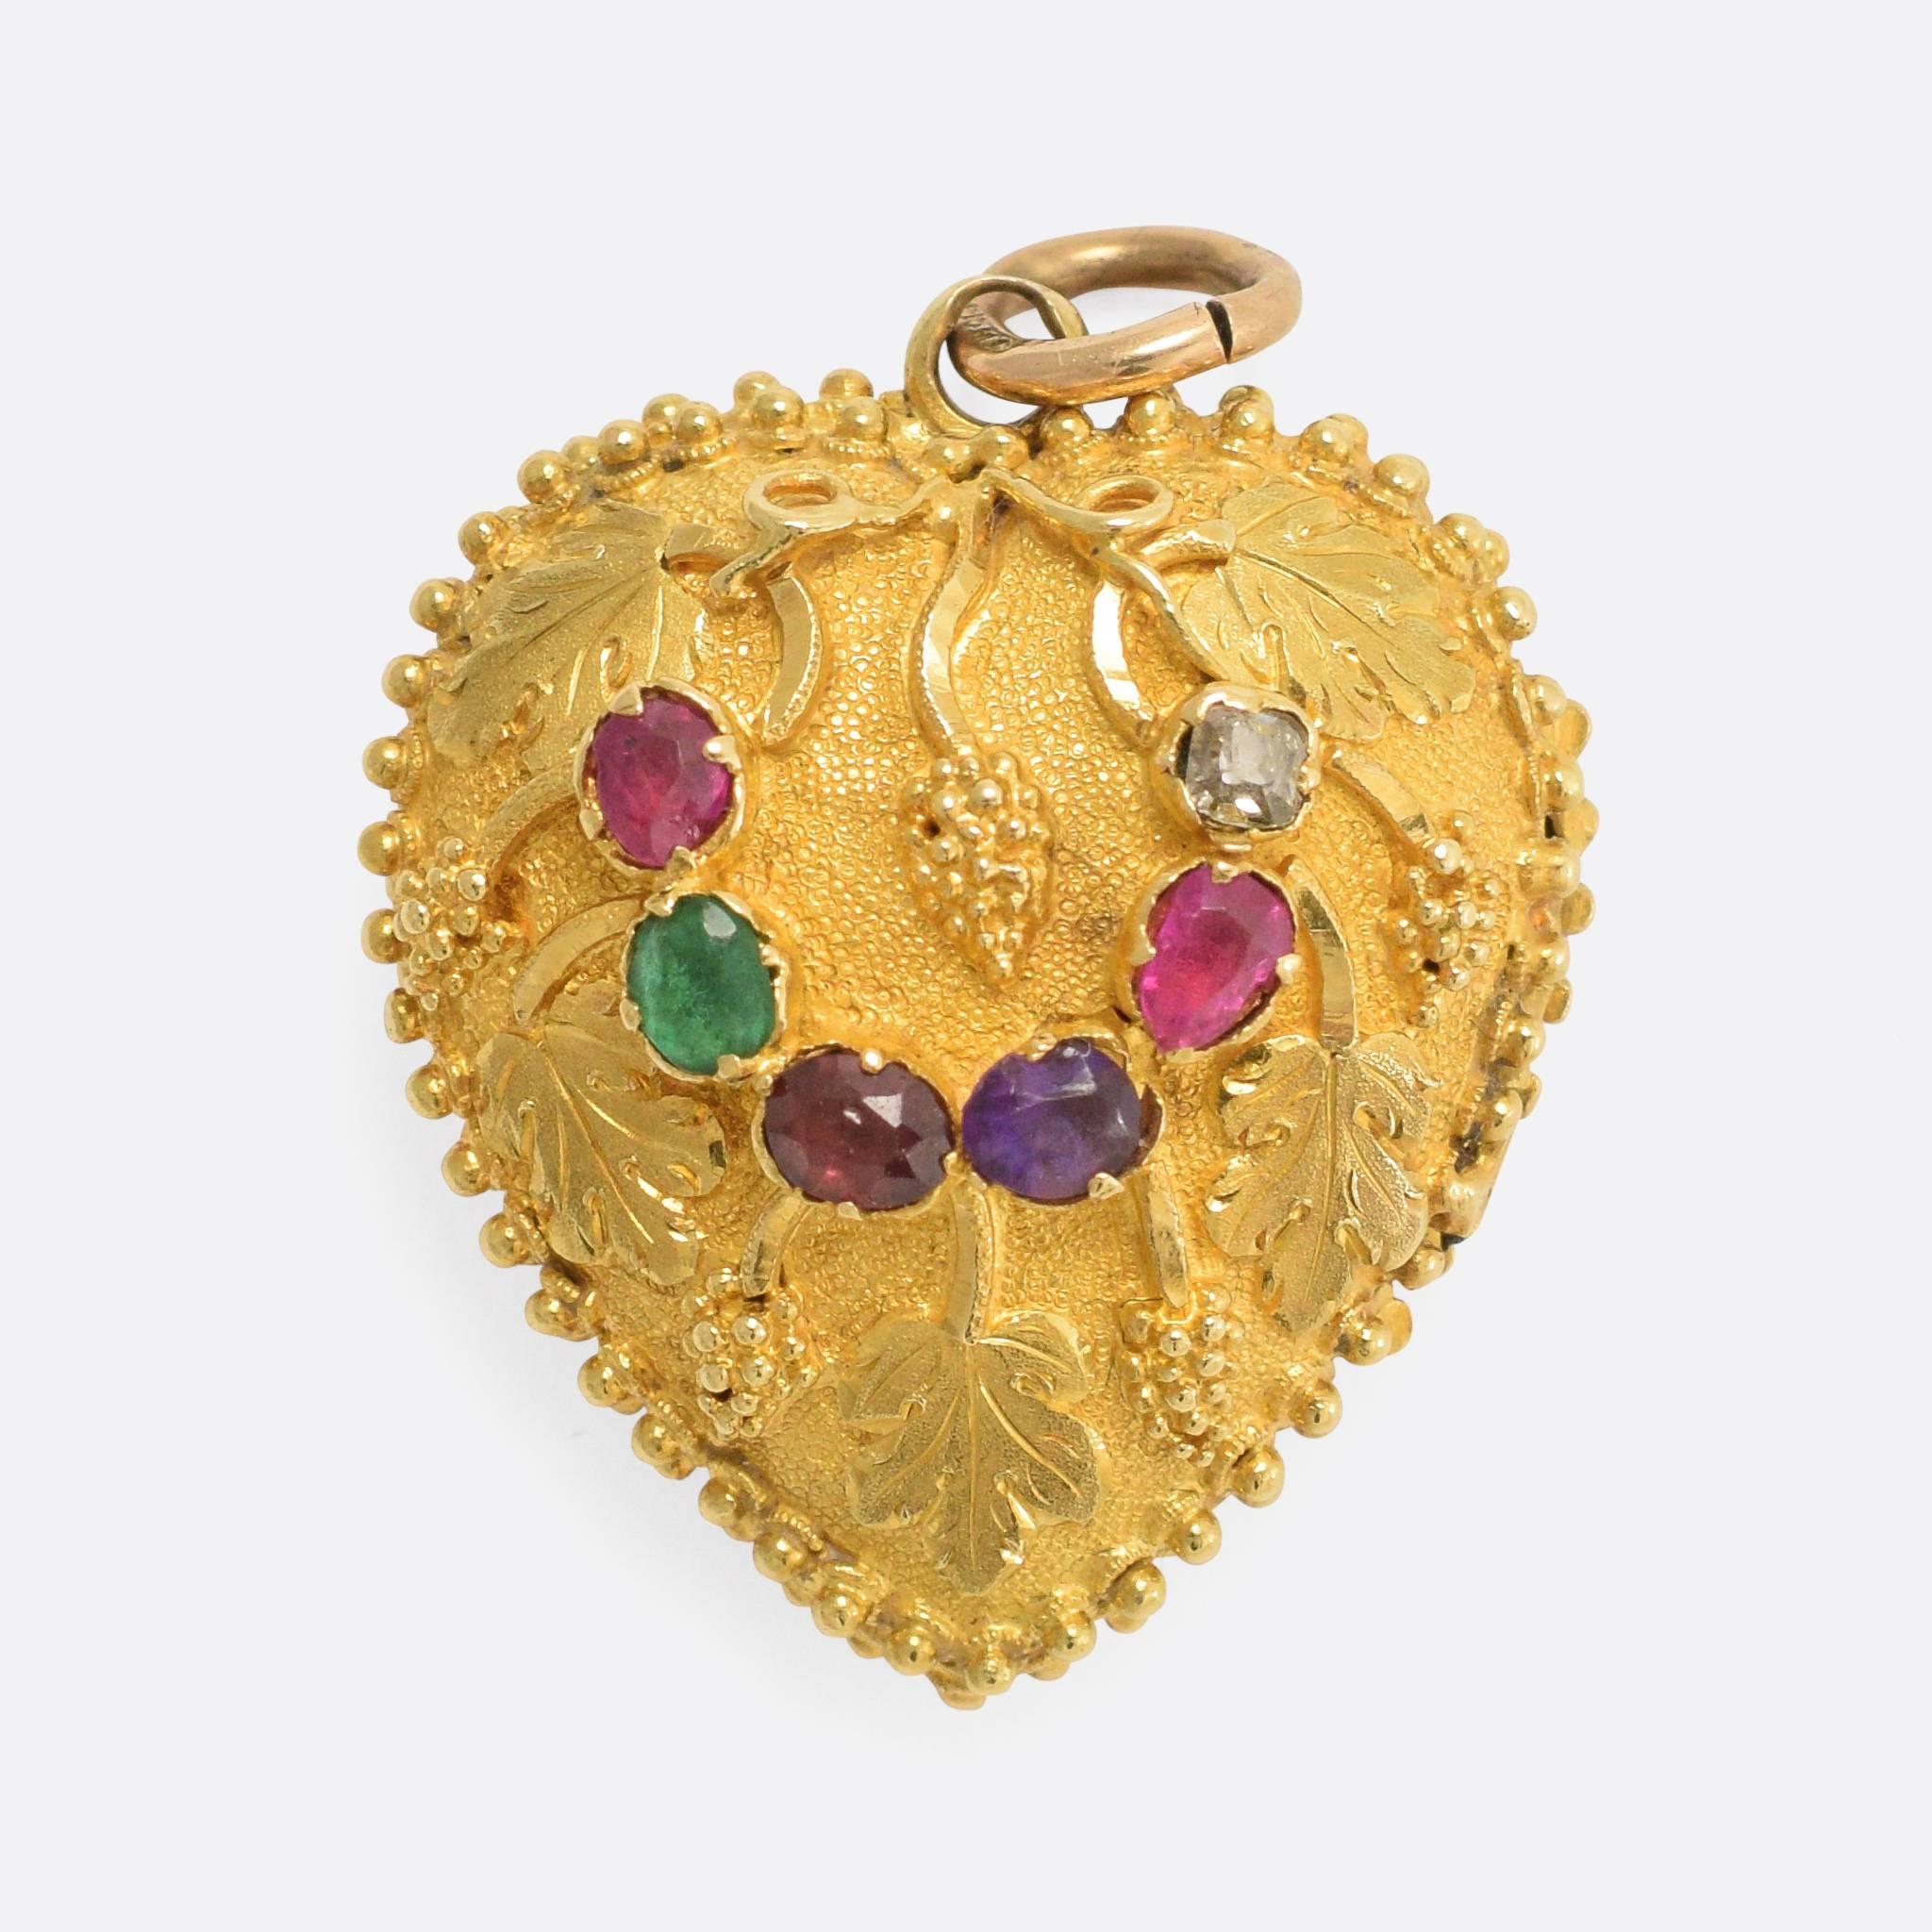 A particularly beautiful antique heart locket, with a gem-set acrostic "Regard" and lovely grape and vine-leaf detailing. The goldwork is superb, with little gold pommels all around the frame - modelled in 18k gold throughout, it dates to